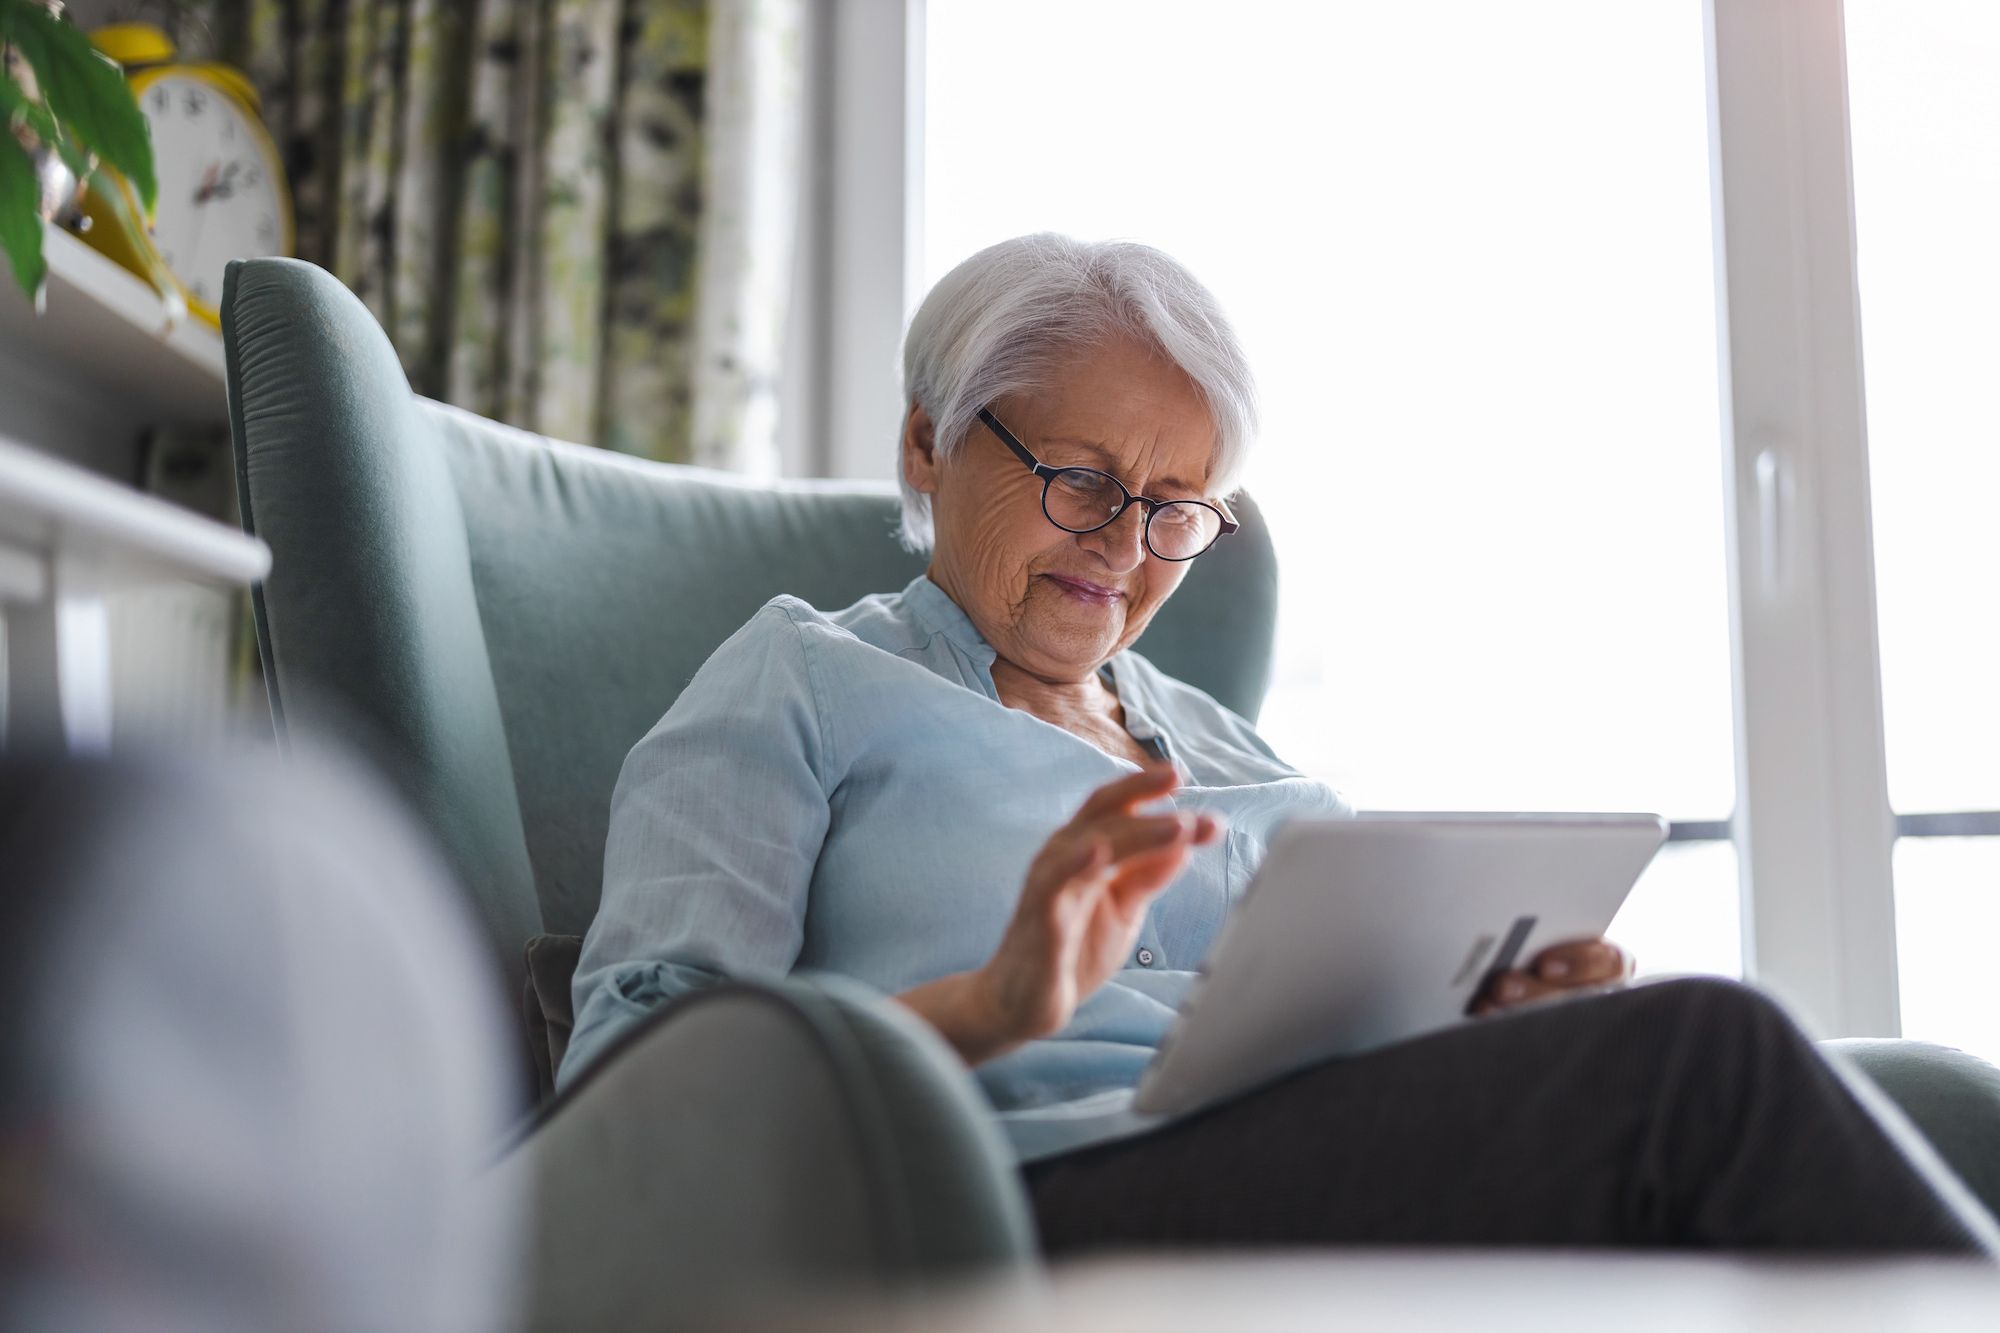 📱Using the Internet can reduce the risk of dementia in older people